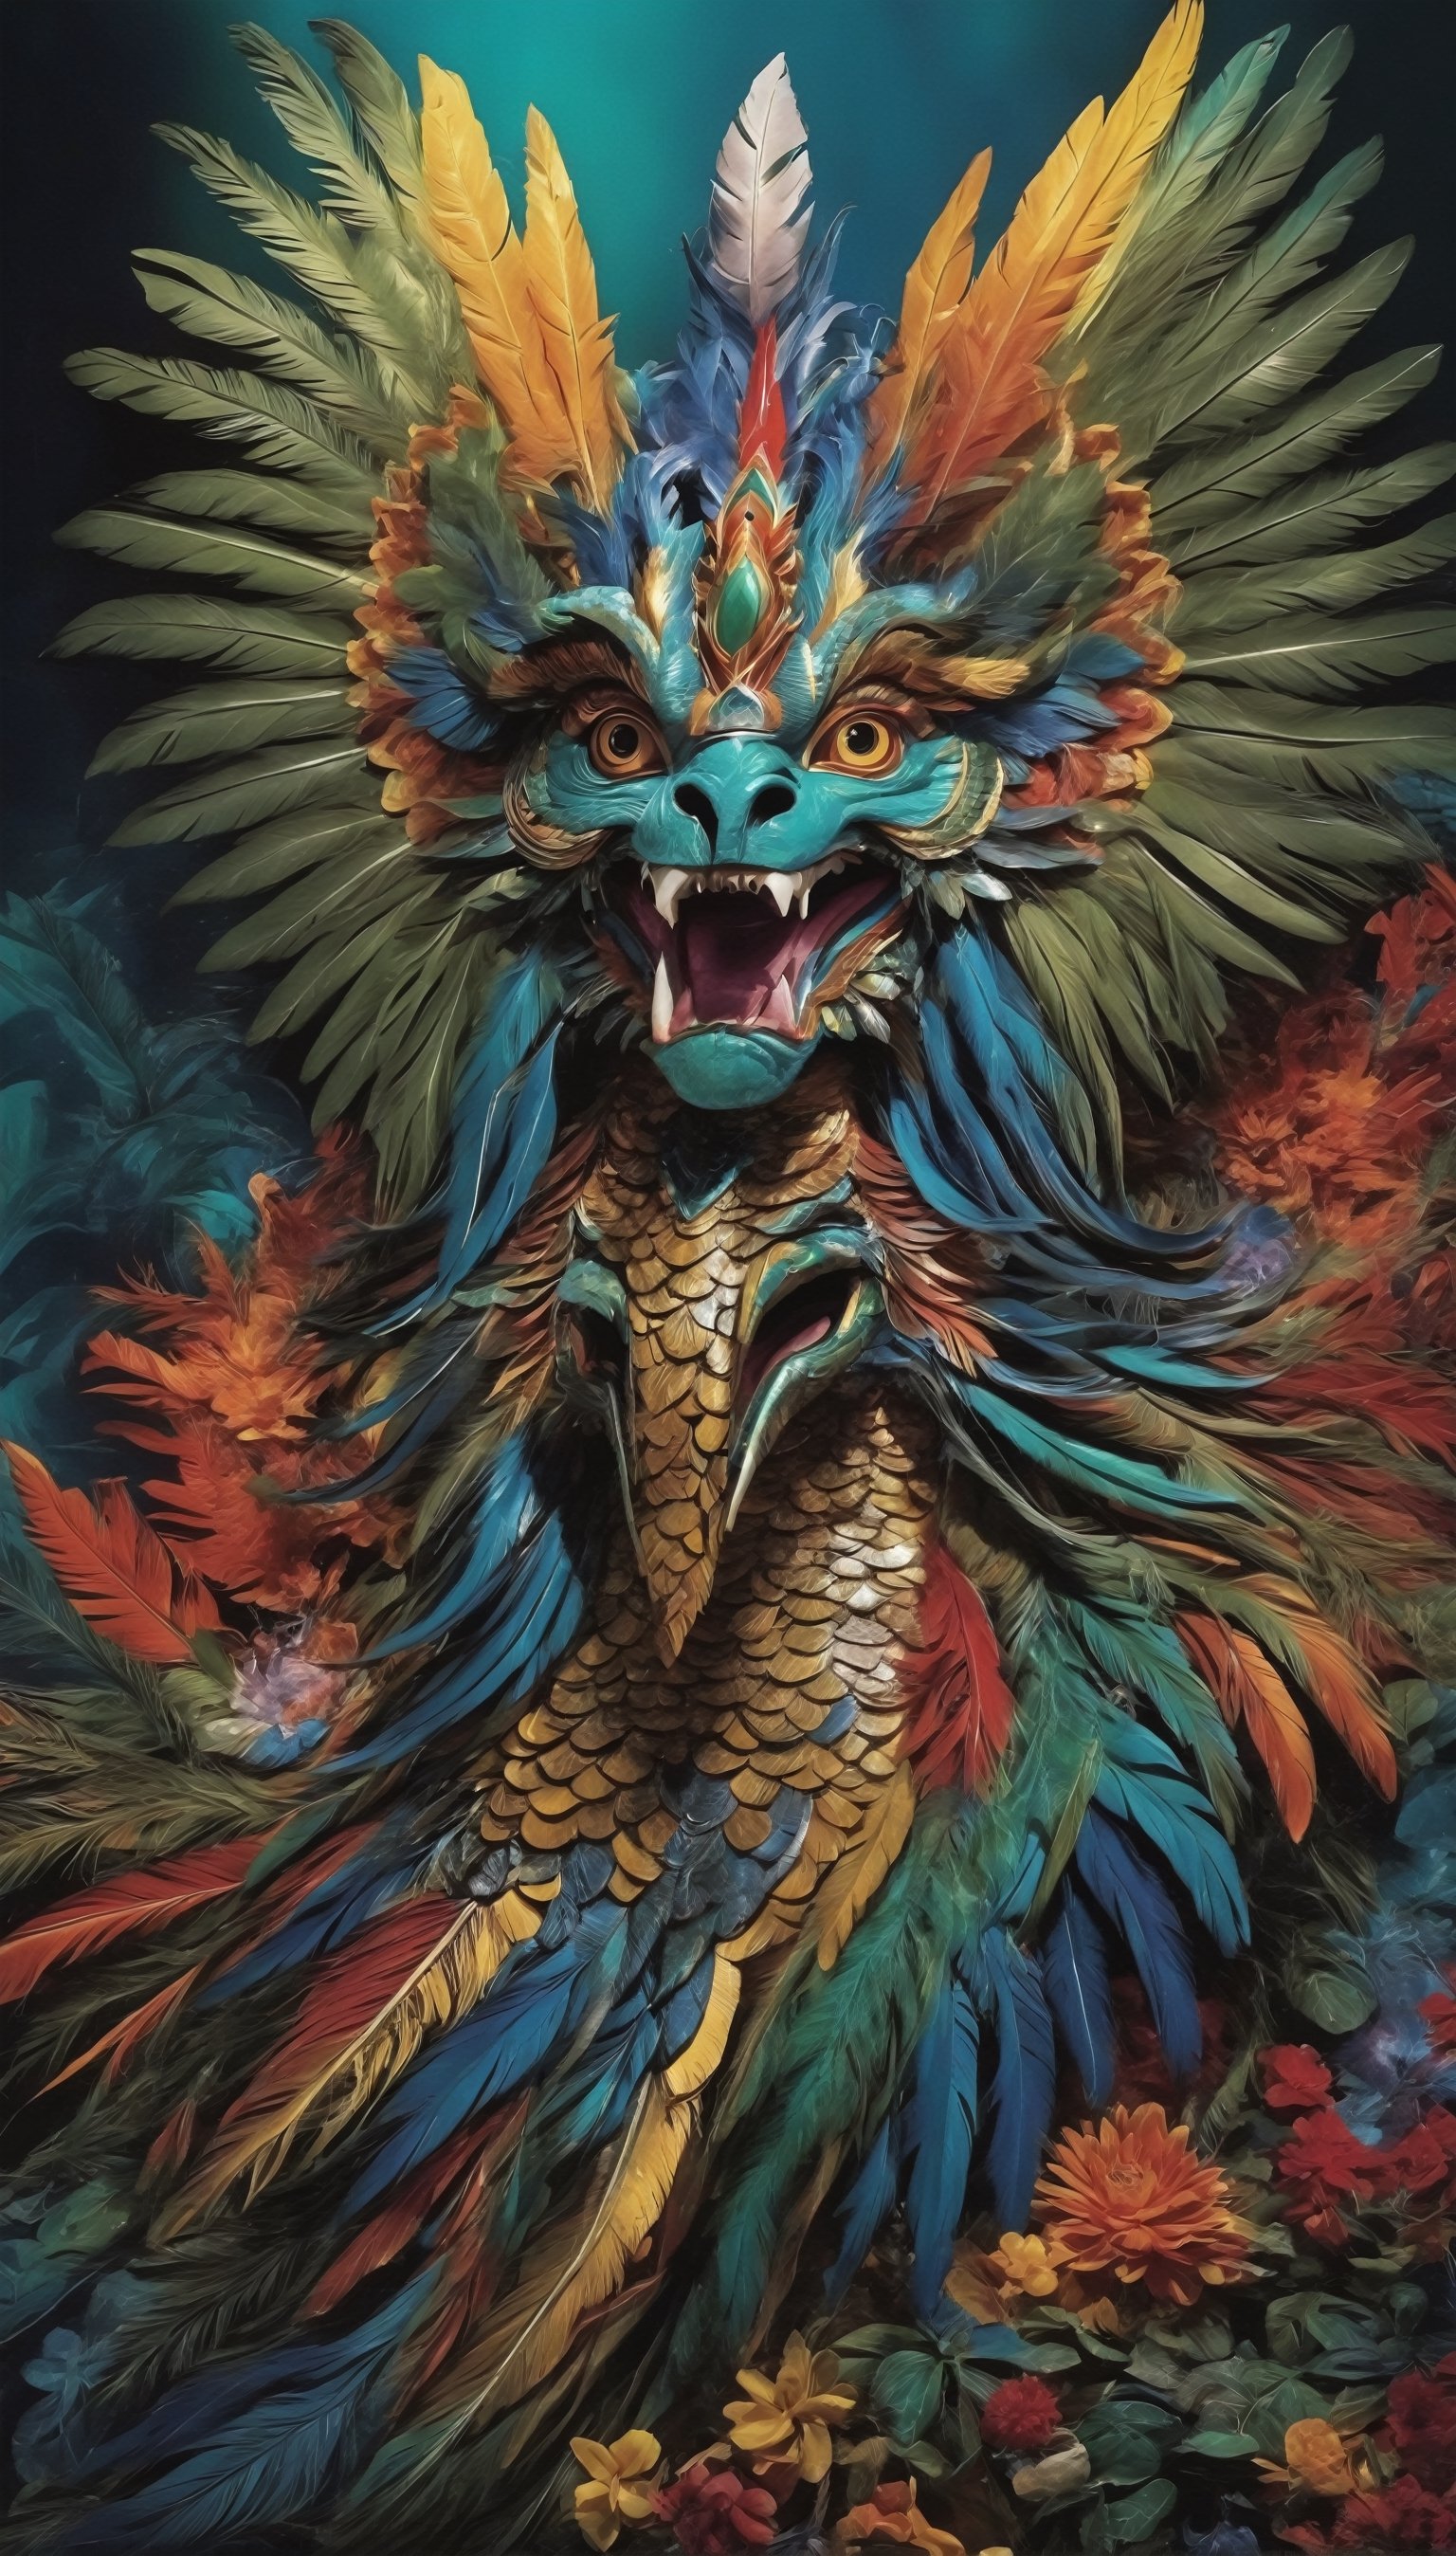  Kukulkan, the feathered serpent god of Mayan mythology, depicted in all his majestic splendor. With a body adorned in vibrant feathers and scales, he embodies the duality of serpentine grace and avian beauty. His form twists and undulates with hypnotic fluidity, commanding the reverence of all who behold him. As he moves, his feathers shimmer in the sunlight, casting a mesmerizing aura around him. With each beat of his wings, he symbolizes the eternal cycle of life, death, and rebirth, embodying the power and wisdom of the Mayan pantheon,ct-drago,ani_booster